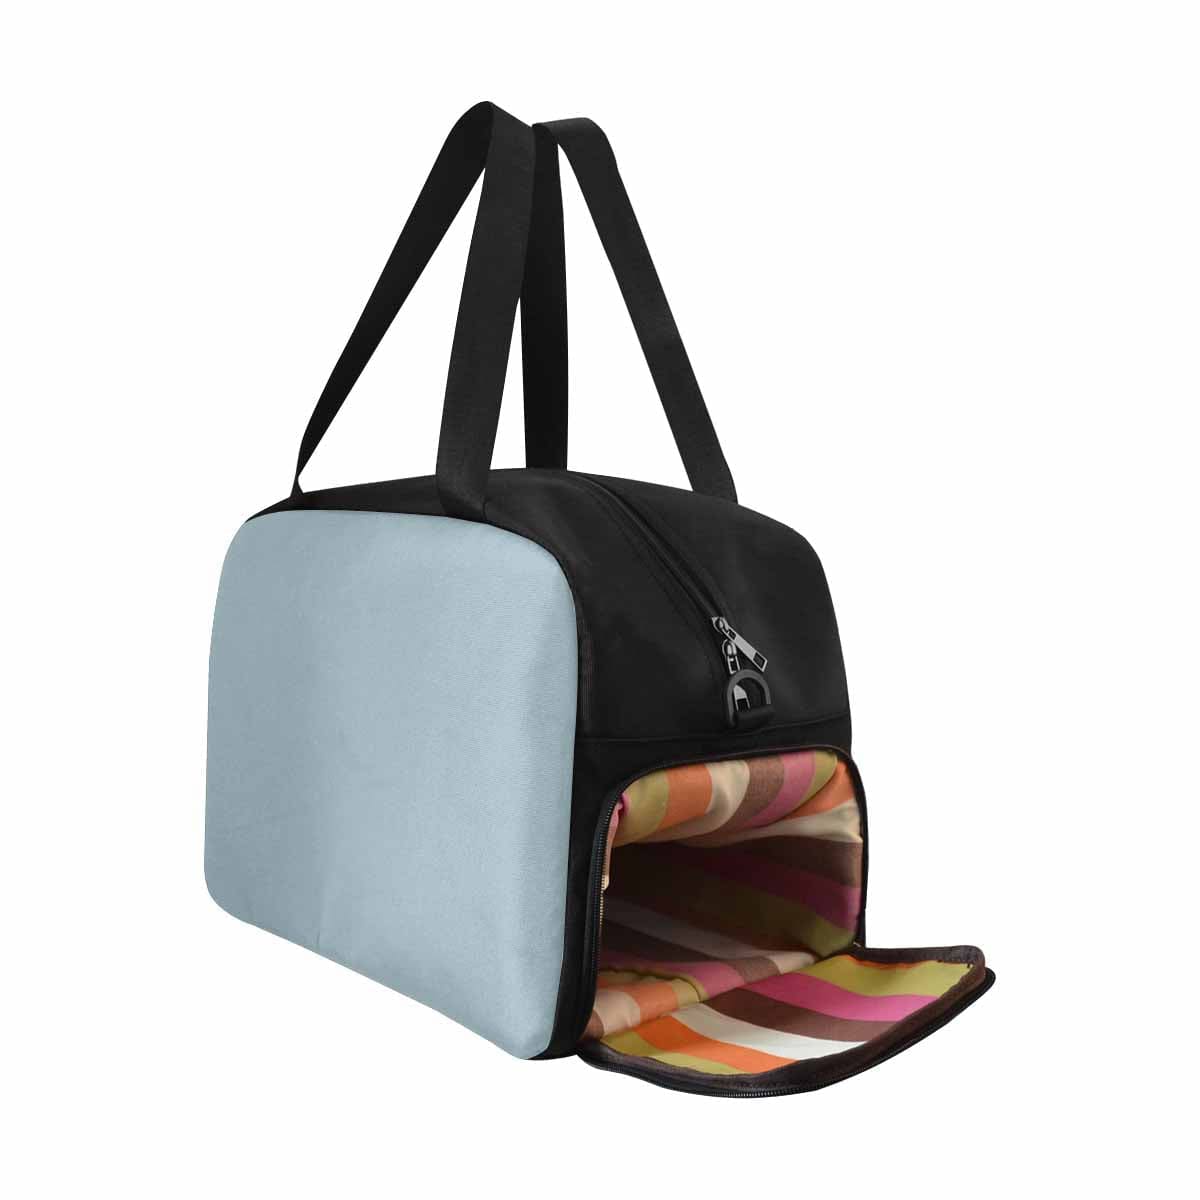 Pastel Blue Tote And Crossbody Travel Bag - Bags | Travel Bags | Crossbody